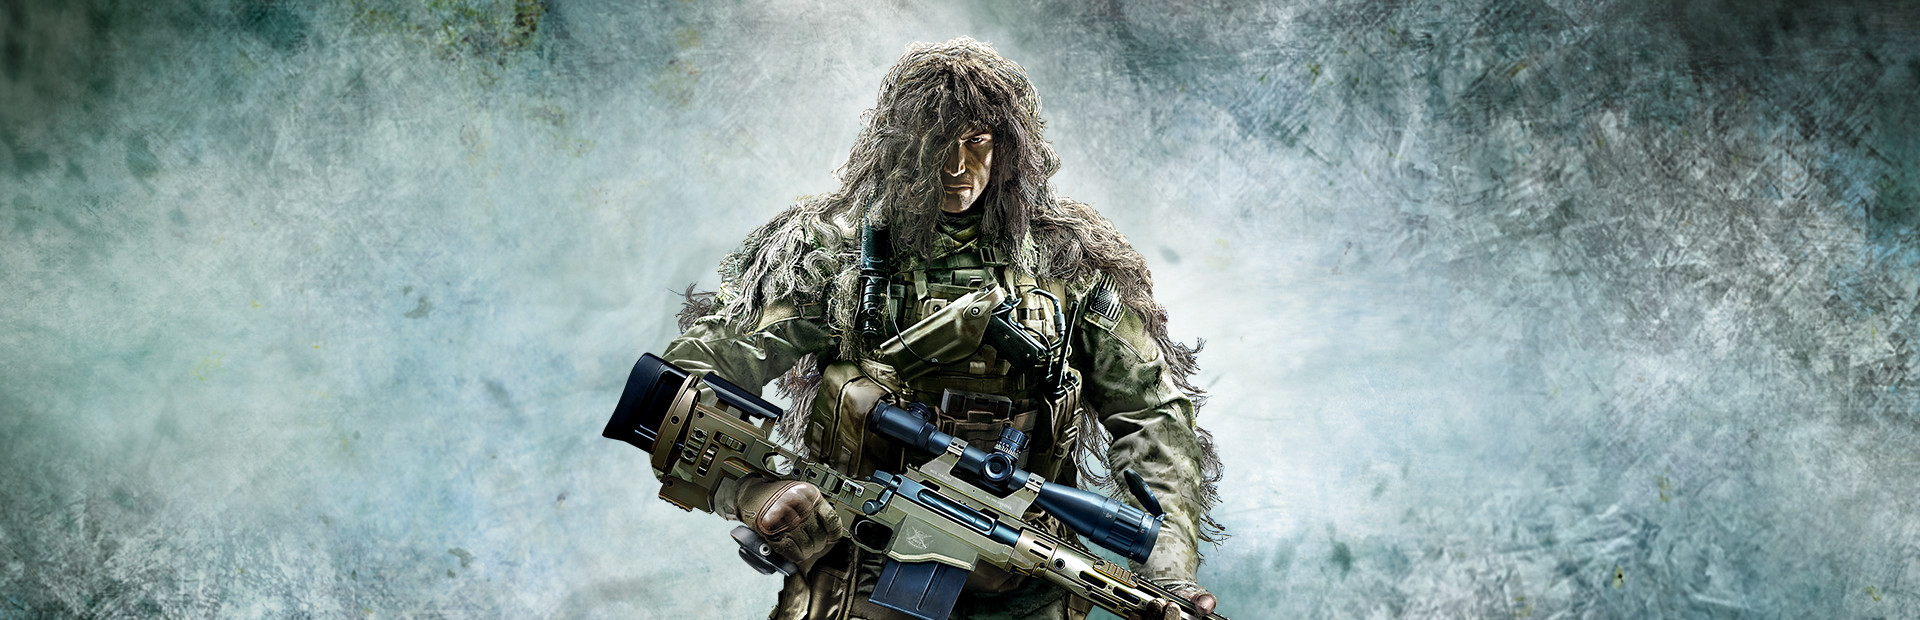 Sniper: Ghost Warrior 2 cover image